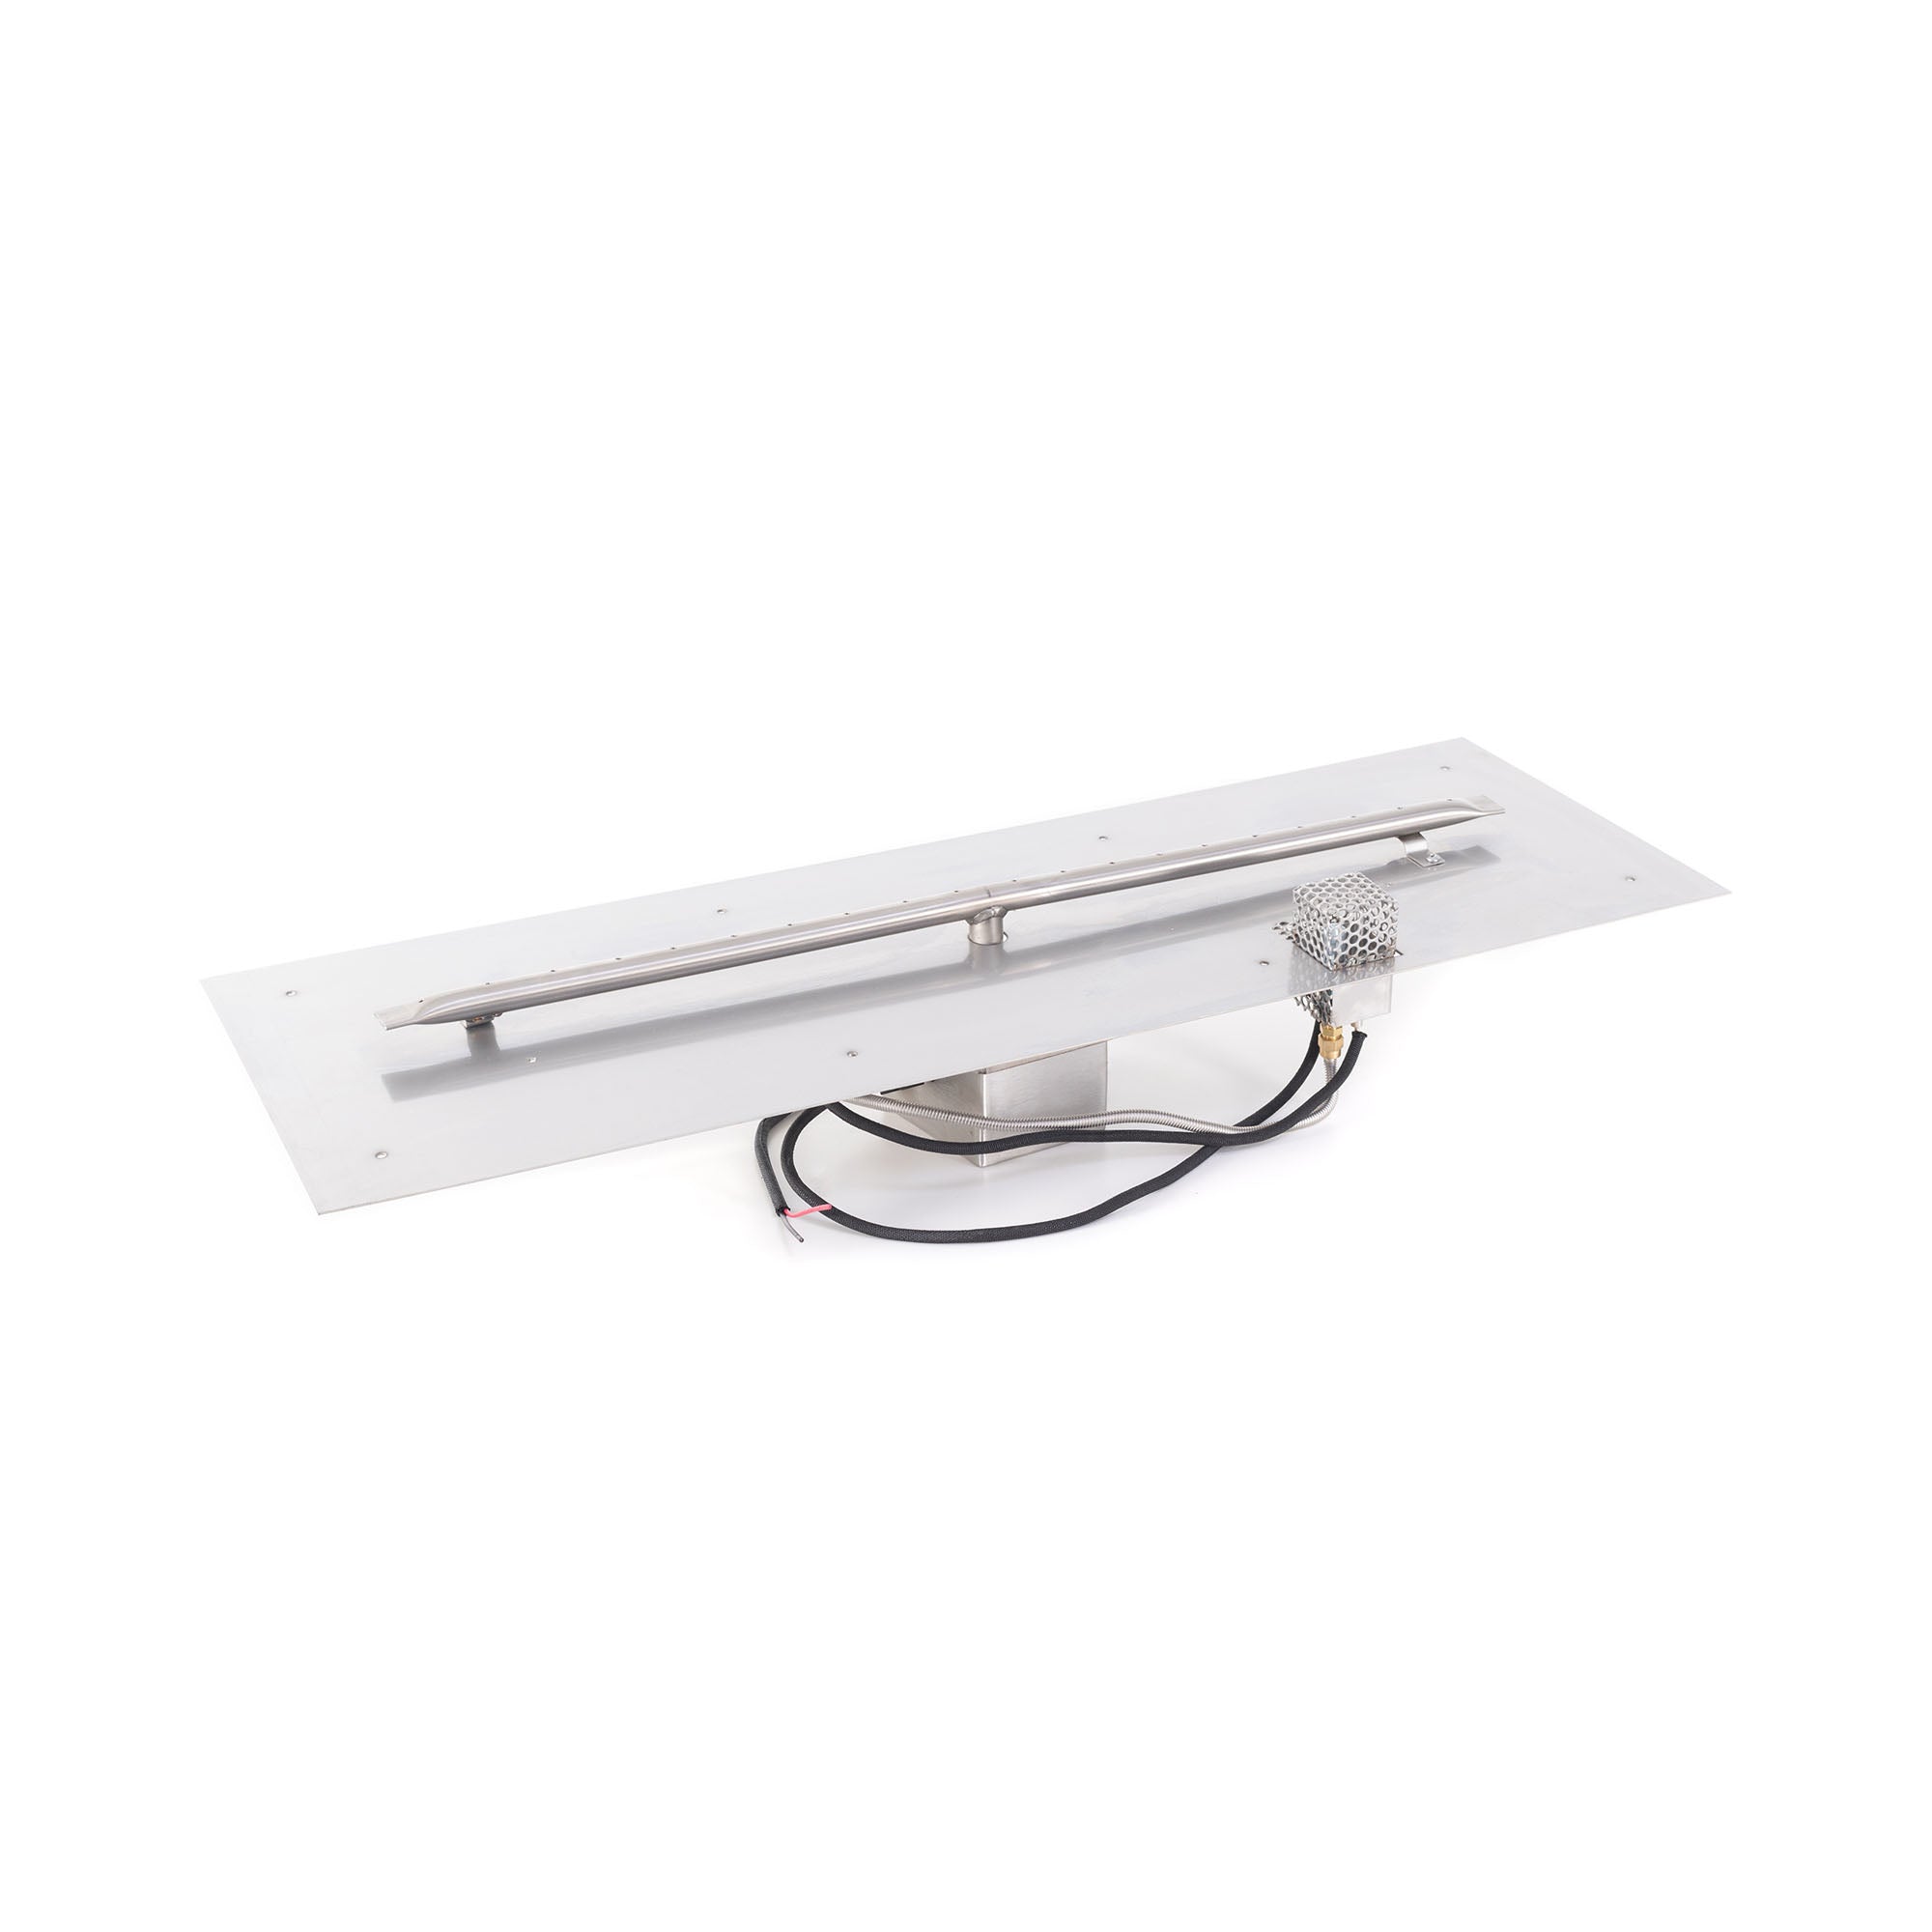 The Outdoor Plus - 24 Inch Rectangular Stainless Steel Flat Pan and 18 Inch Linear Burner - OPT-REFS624